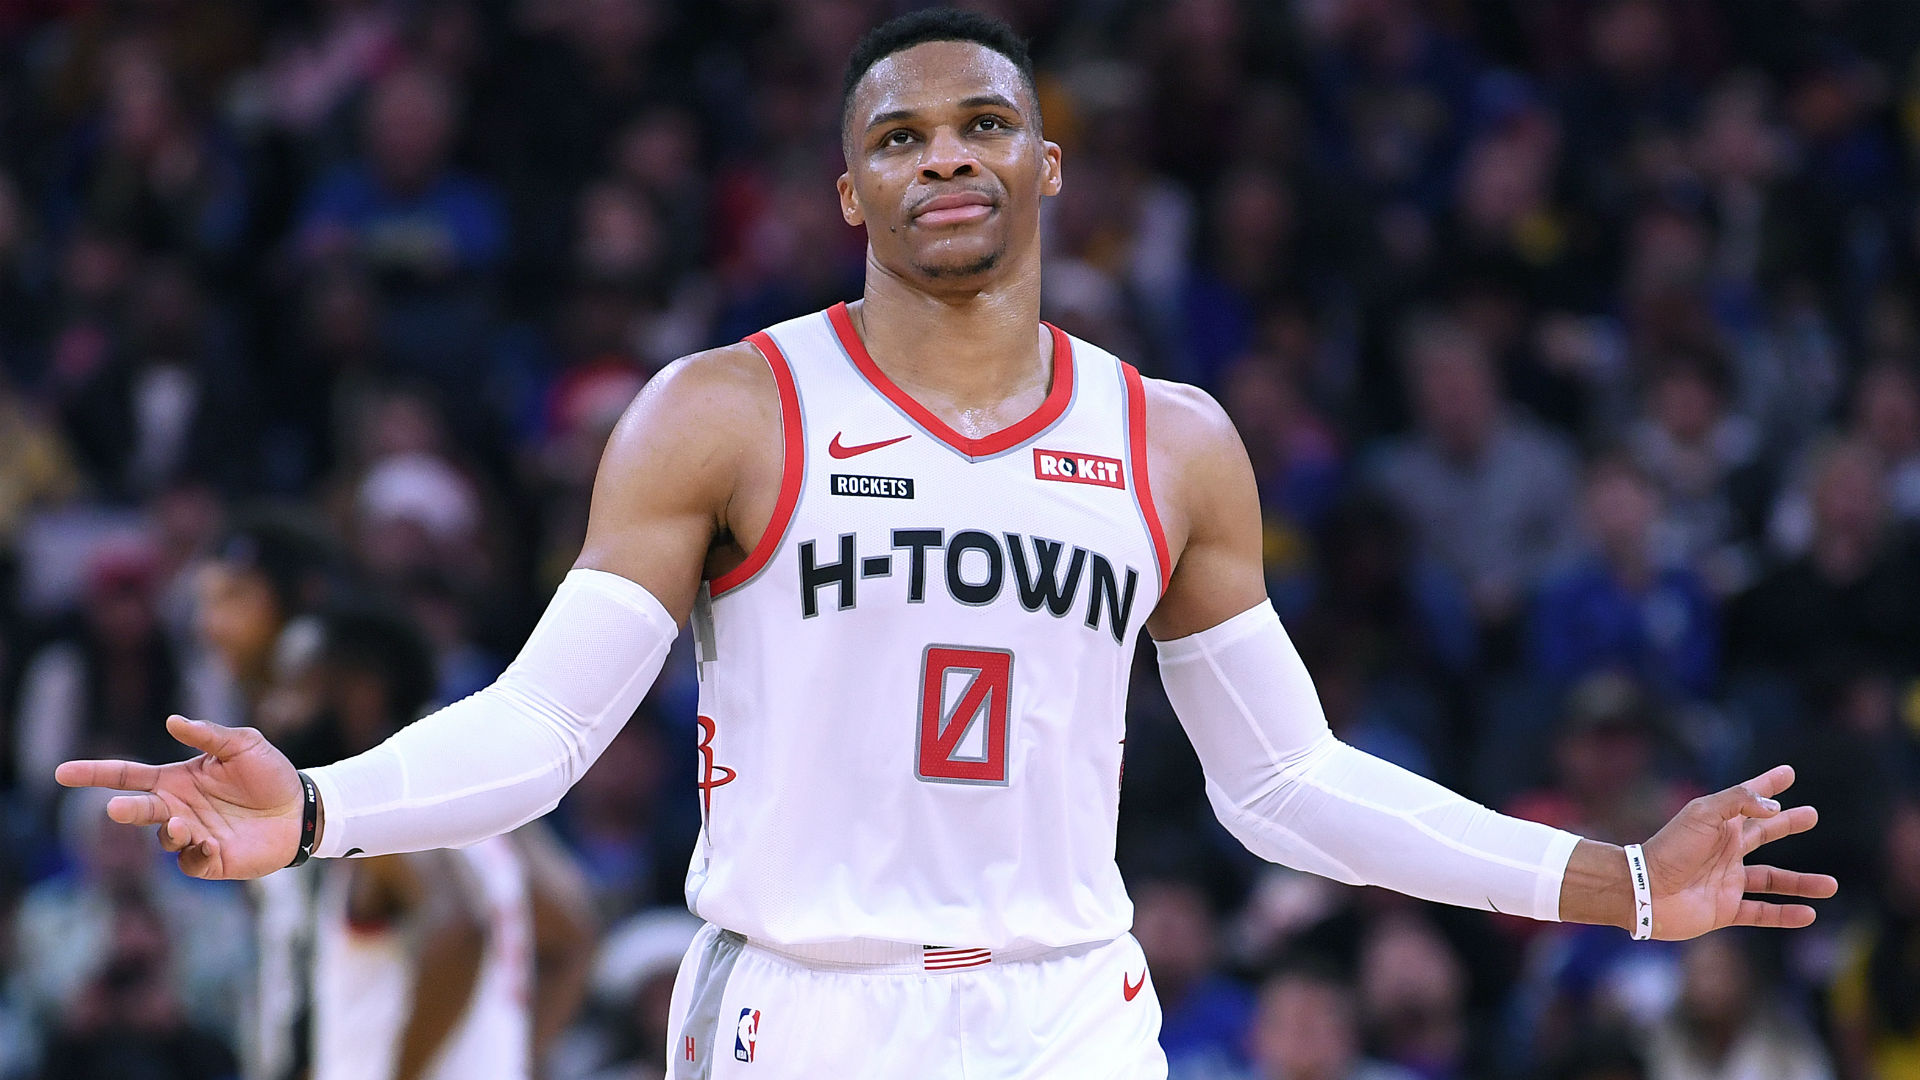 The Houston Rockets will initially be without Russell Westbrook in Orlando after he tested positive for coronavirus.